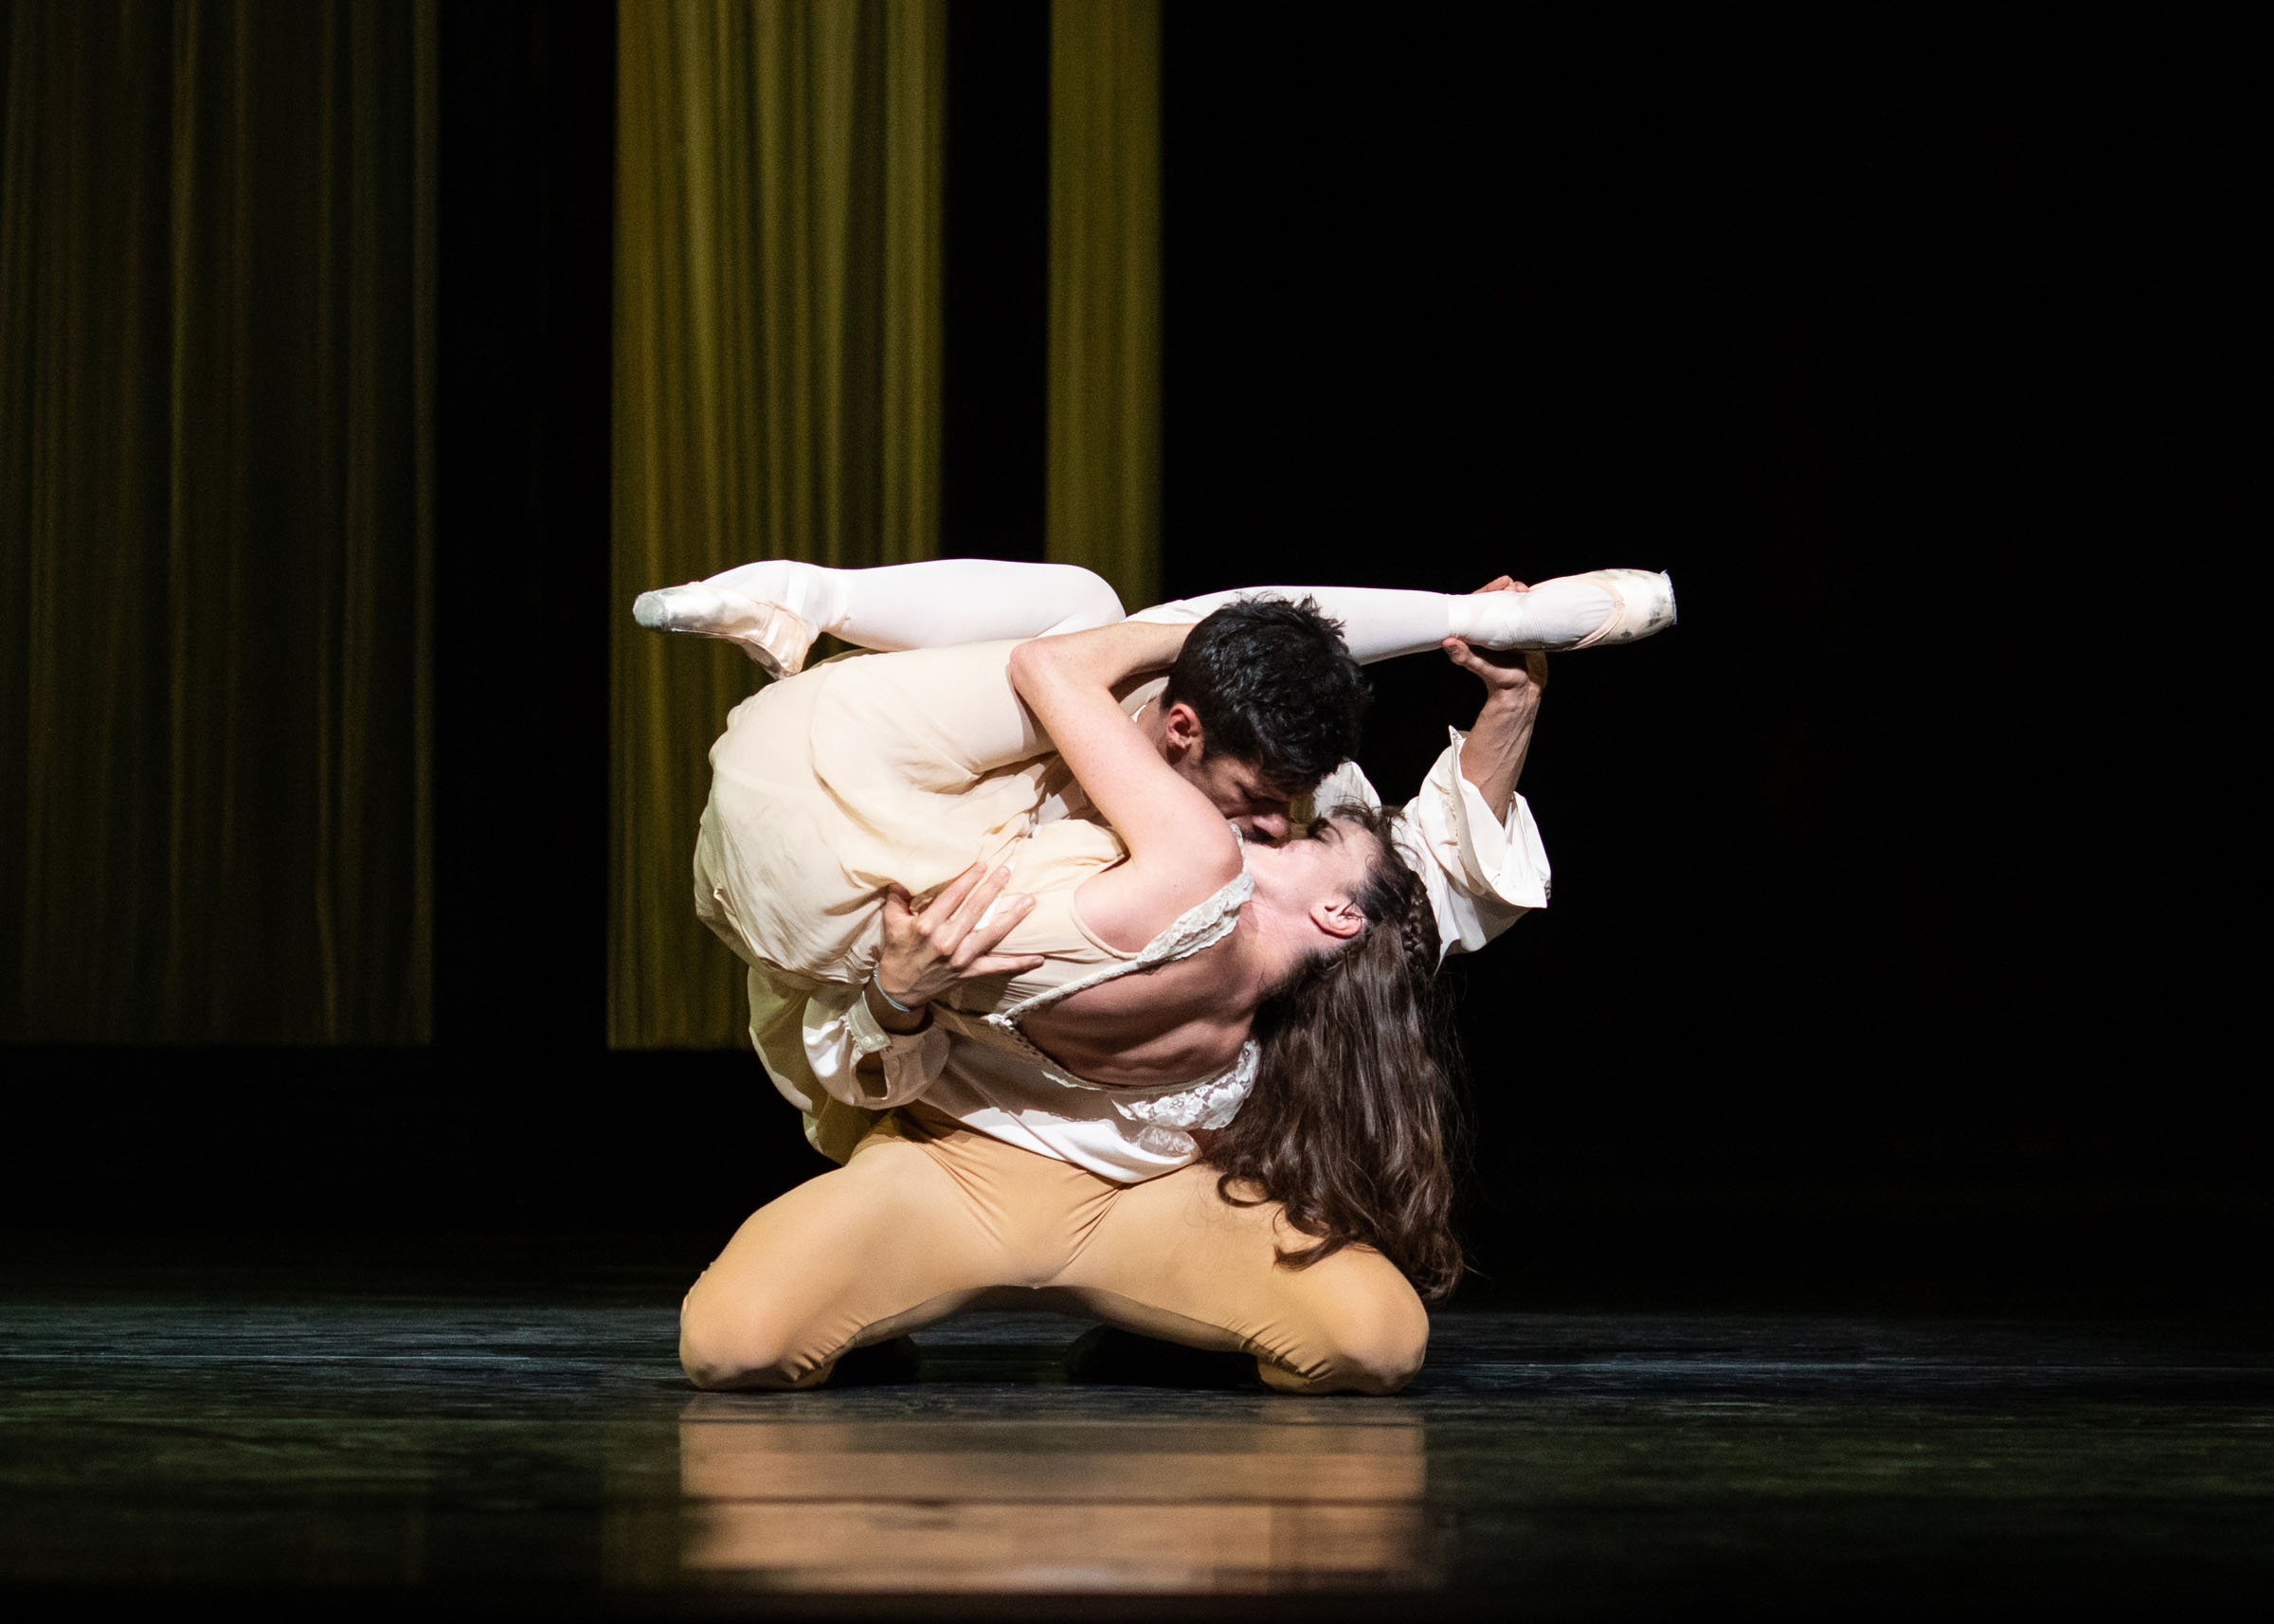 Lauren Cuthbertson and Thiago Soares in Mayerling at the Royal Opera House